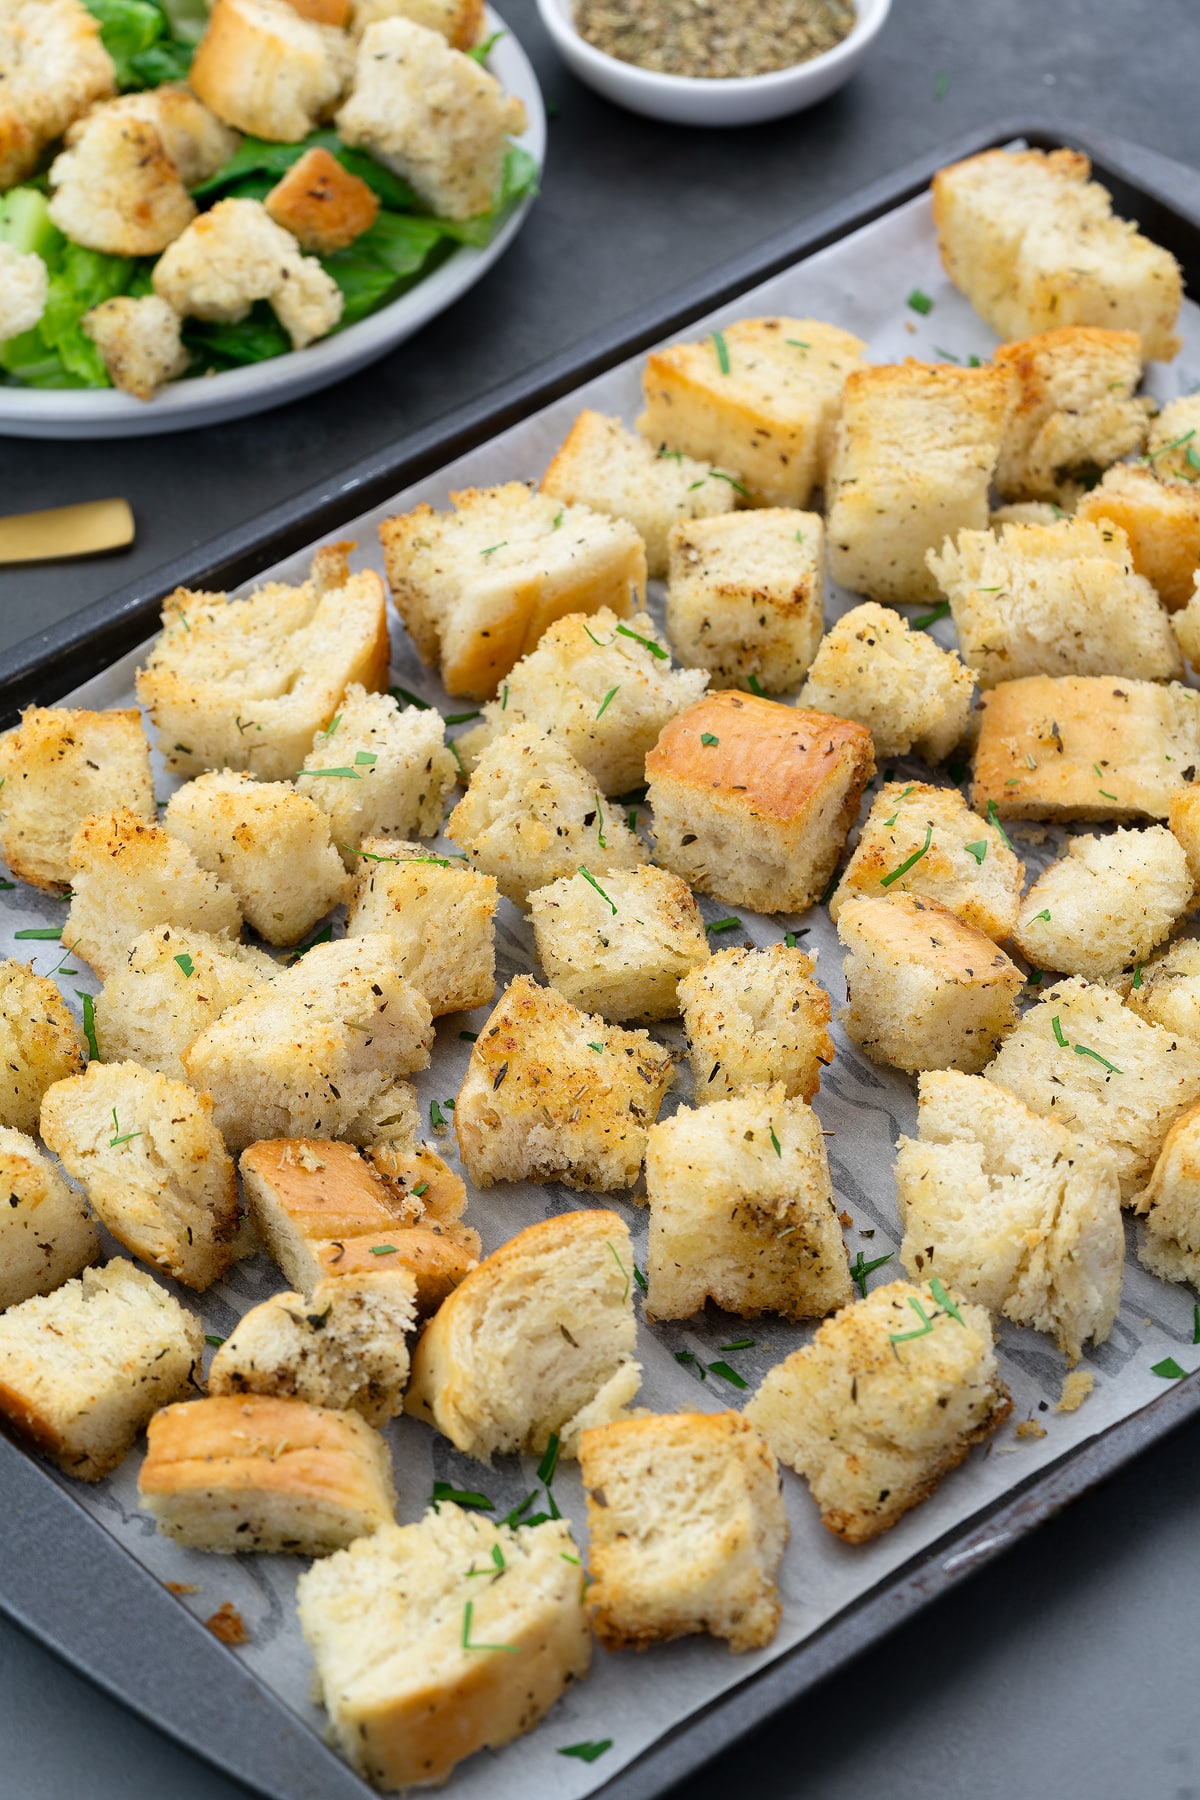 Homemade croutons on a baking tray, a small cup of pepper, and a plate of croutons and lettuce mix.